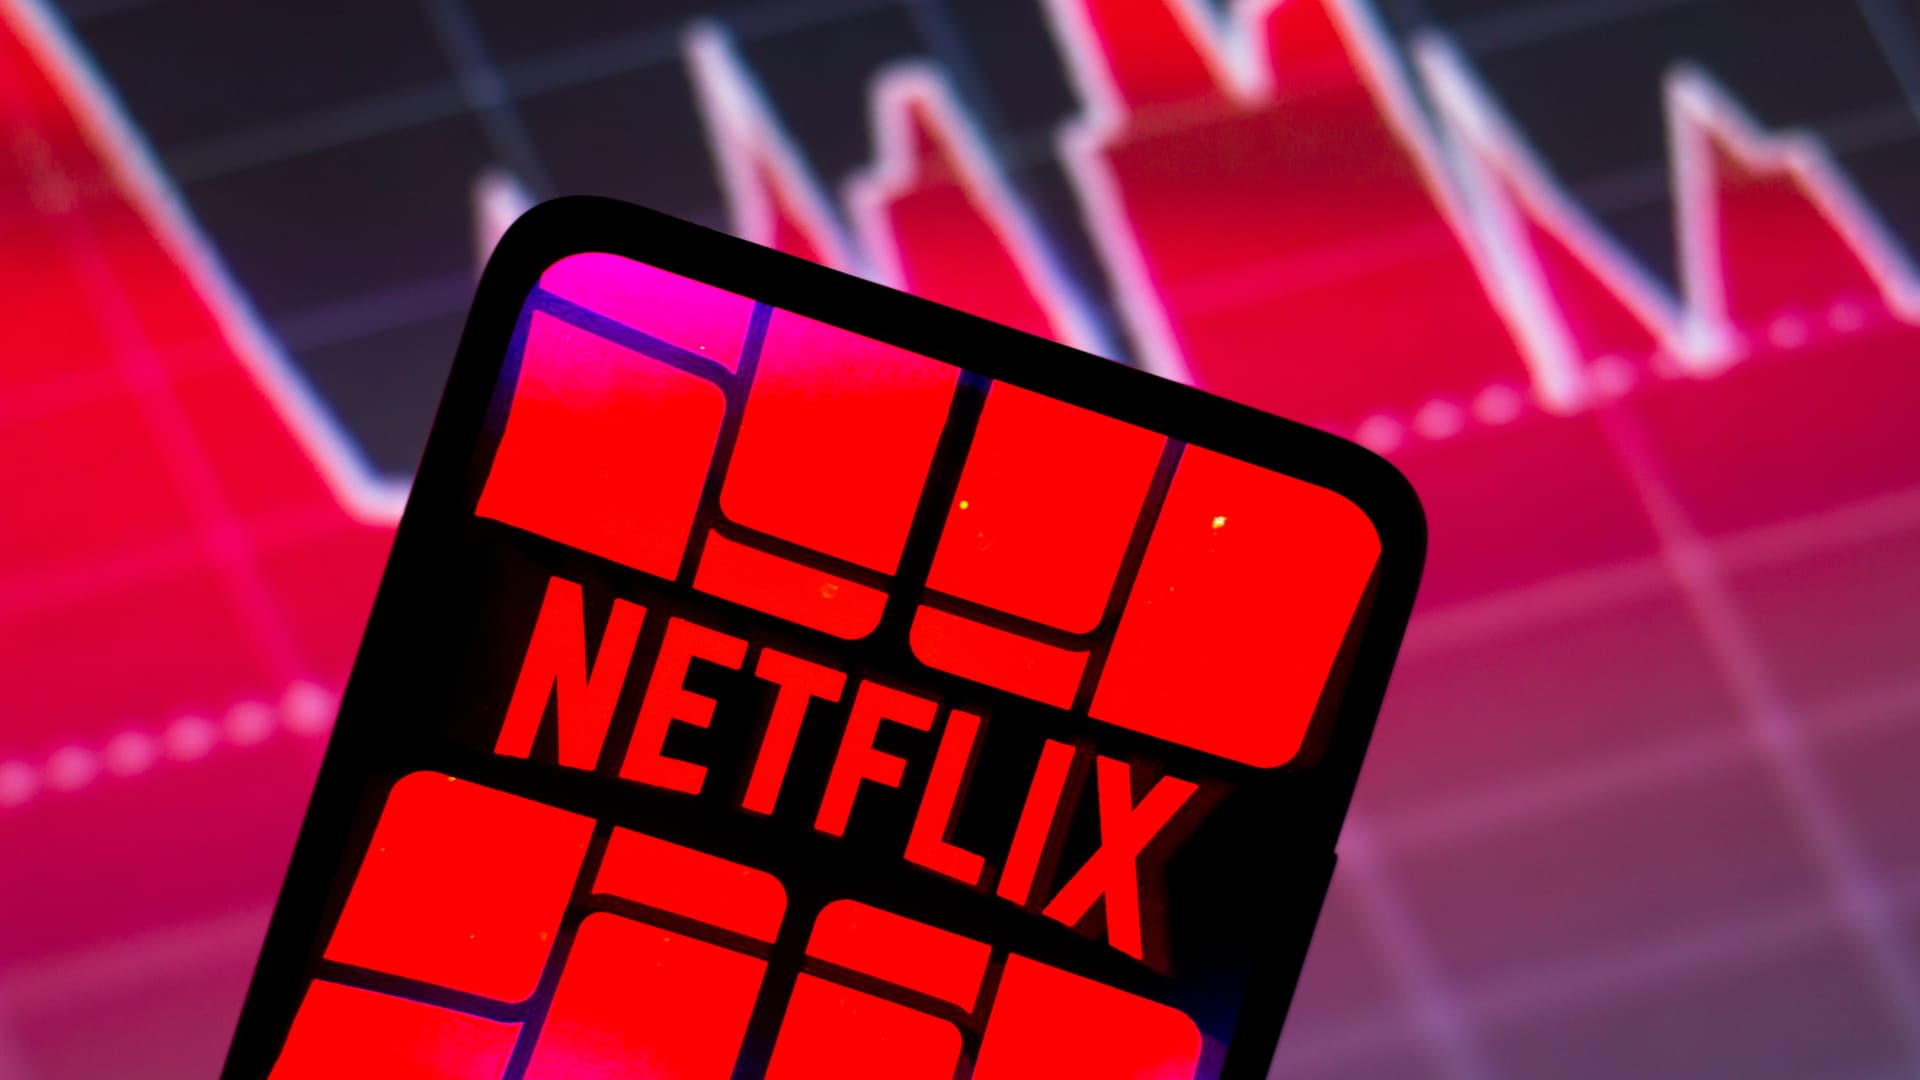 Stocks making the biggest moves after hours: Netflix, Nordstrom and more